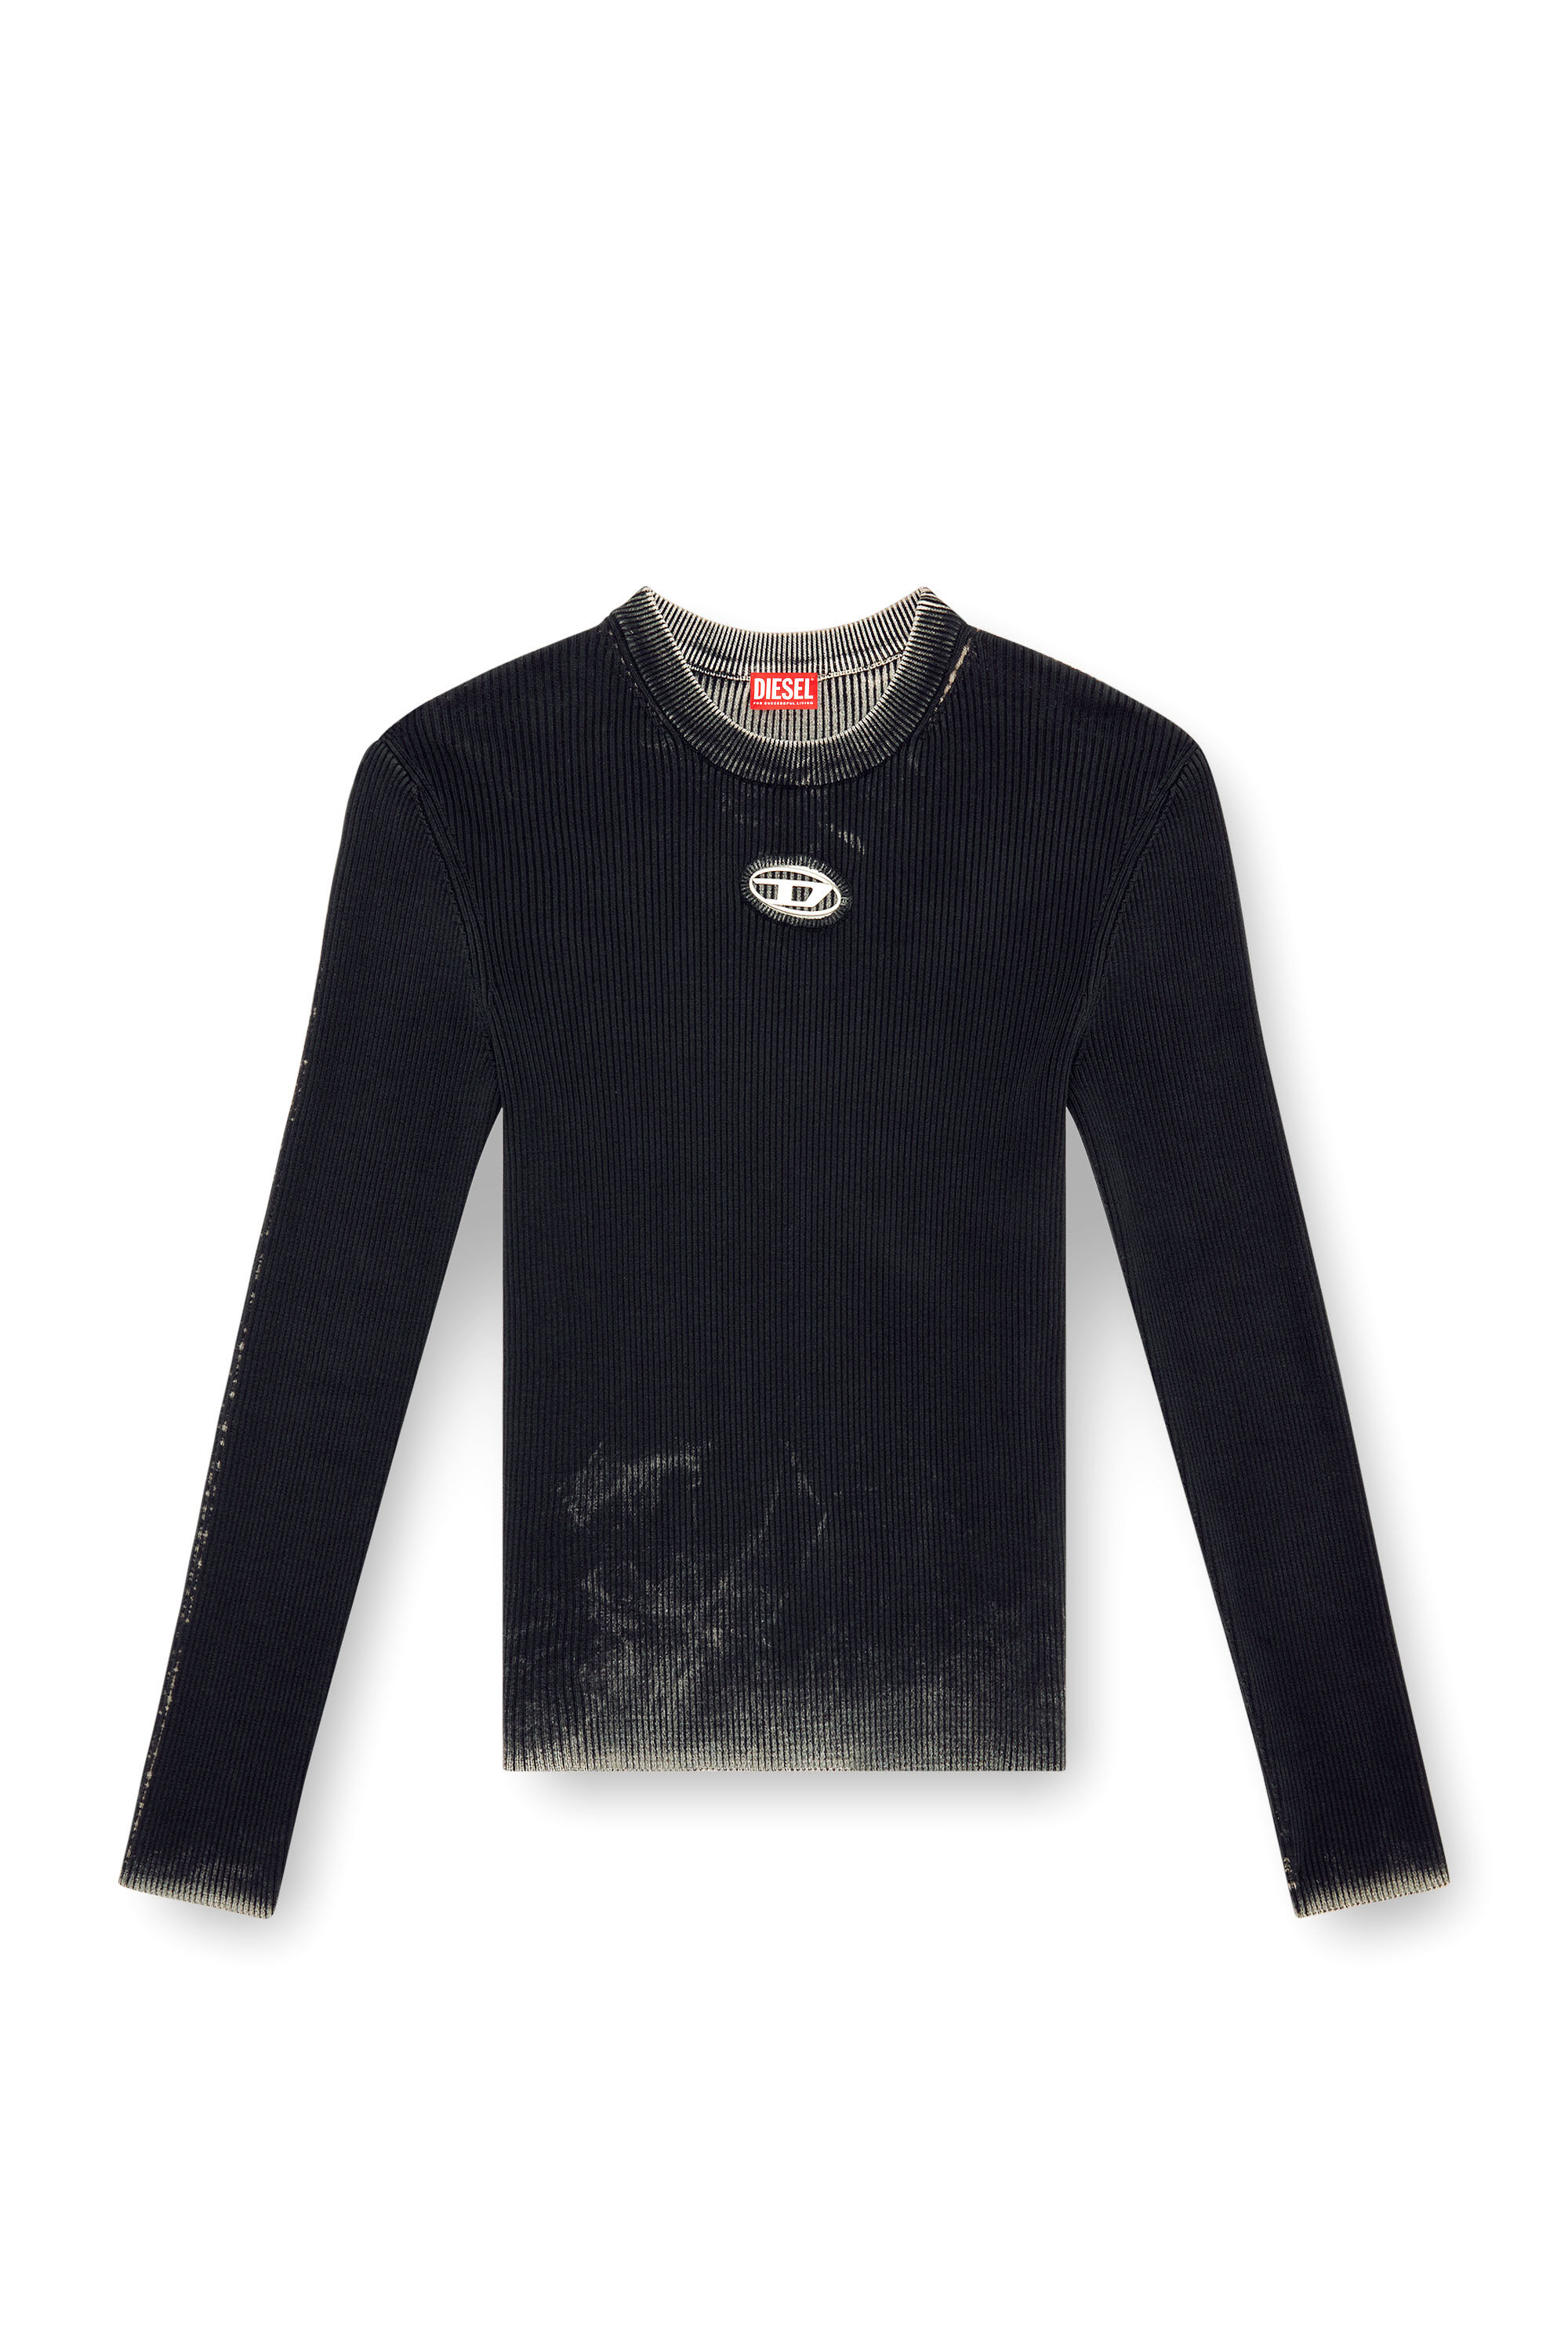 Diesel - K-DARIN-A, Man Cut-out jumper with Oval D in Black - Image 2